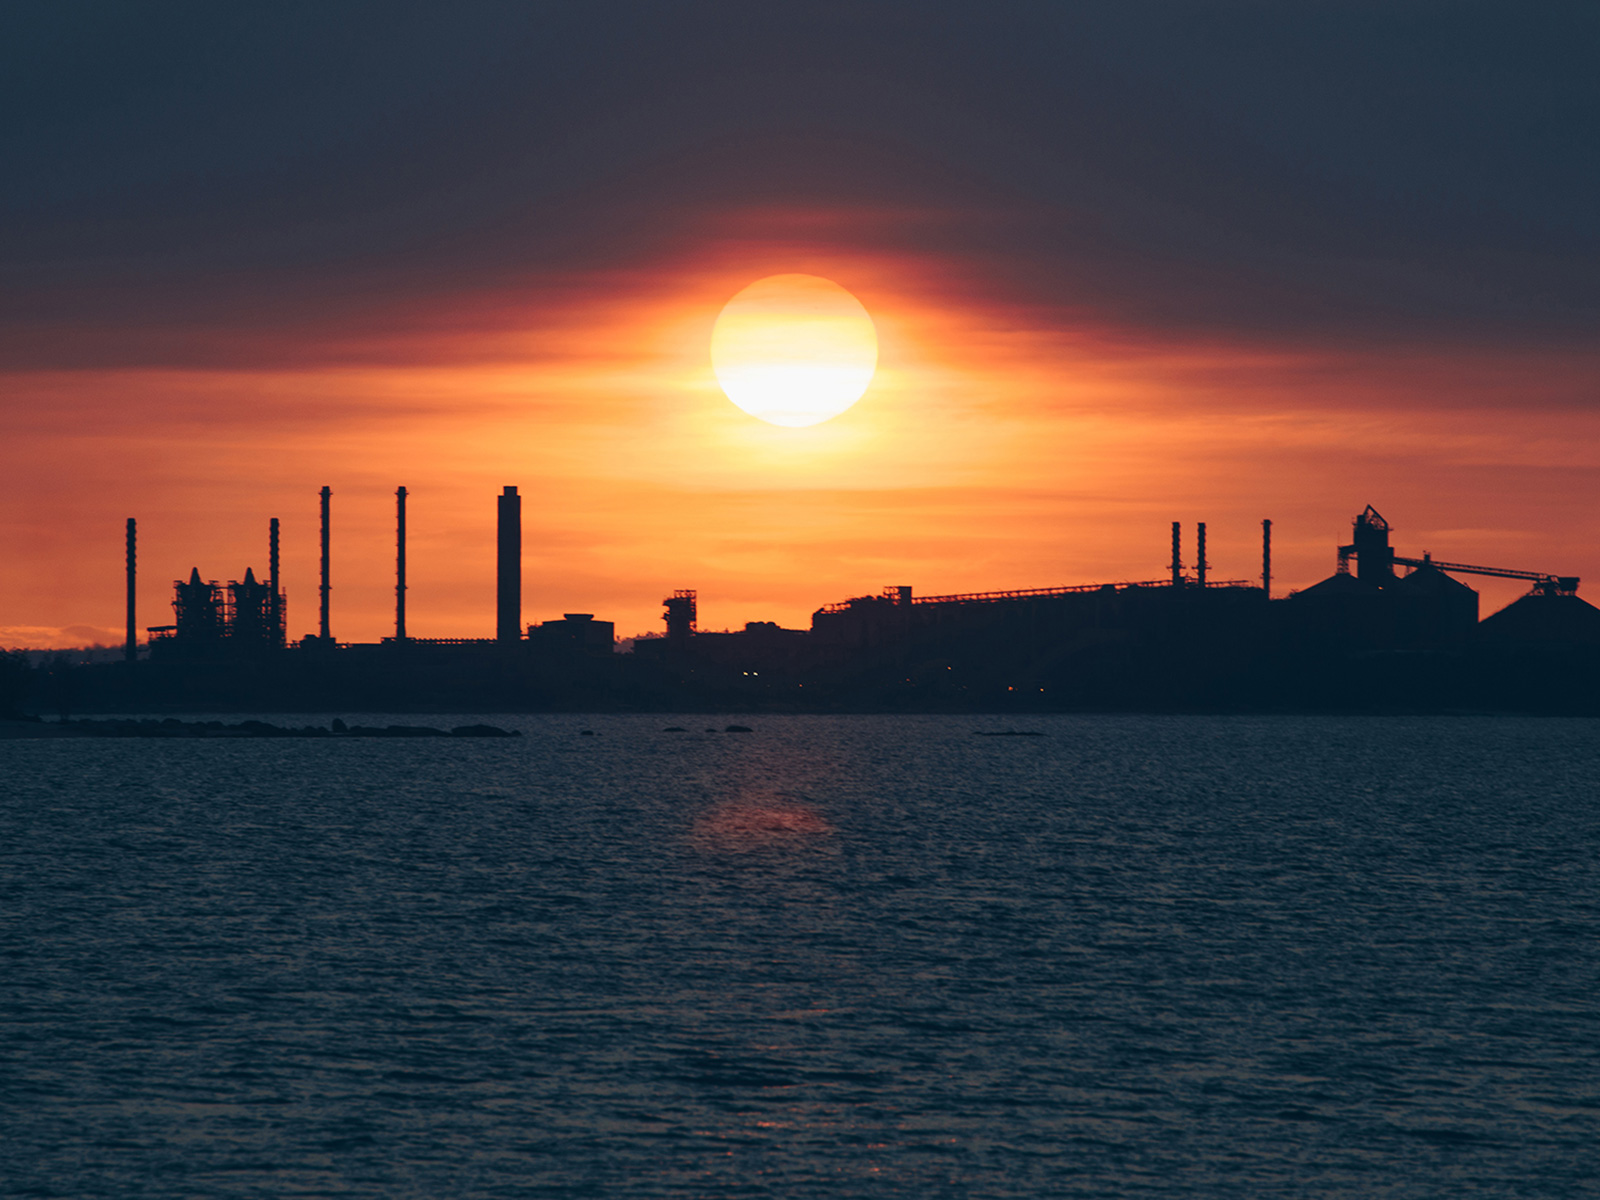 Sun setting over a power station